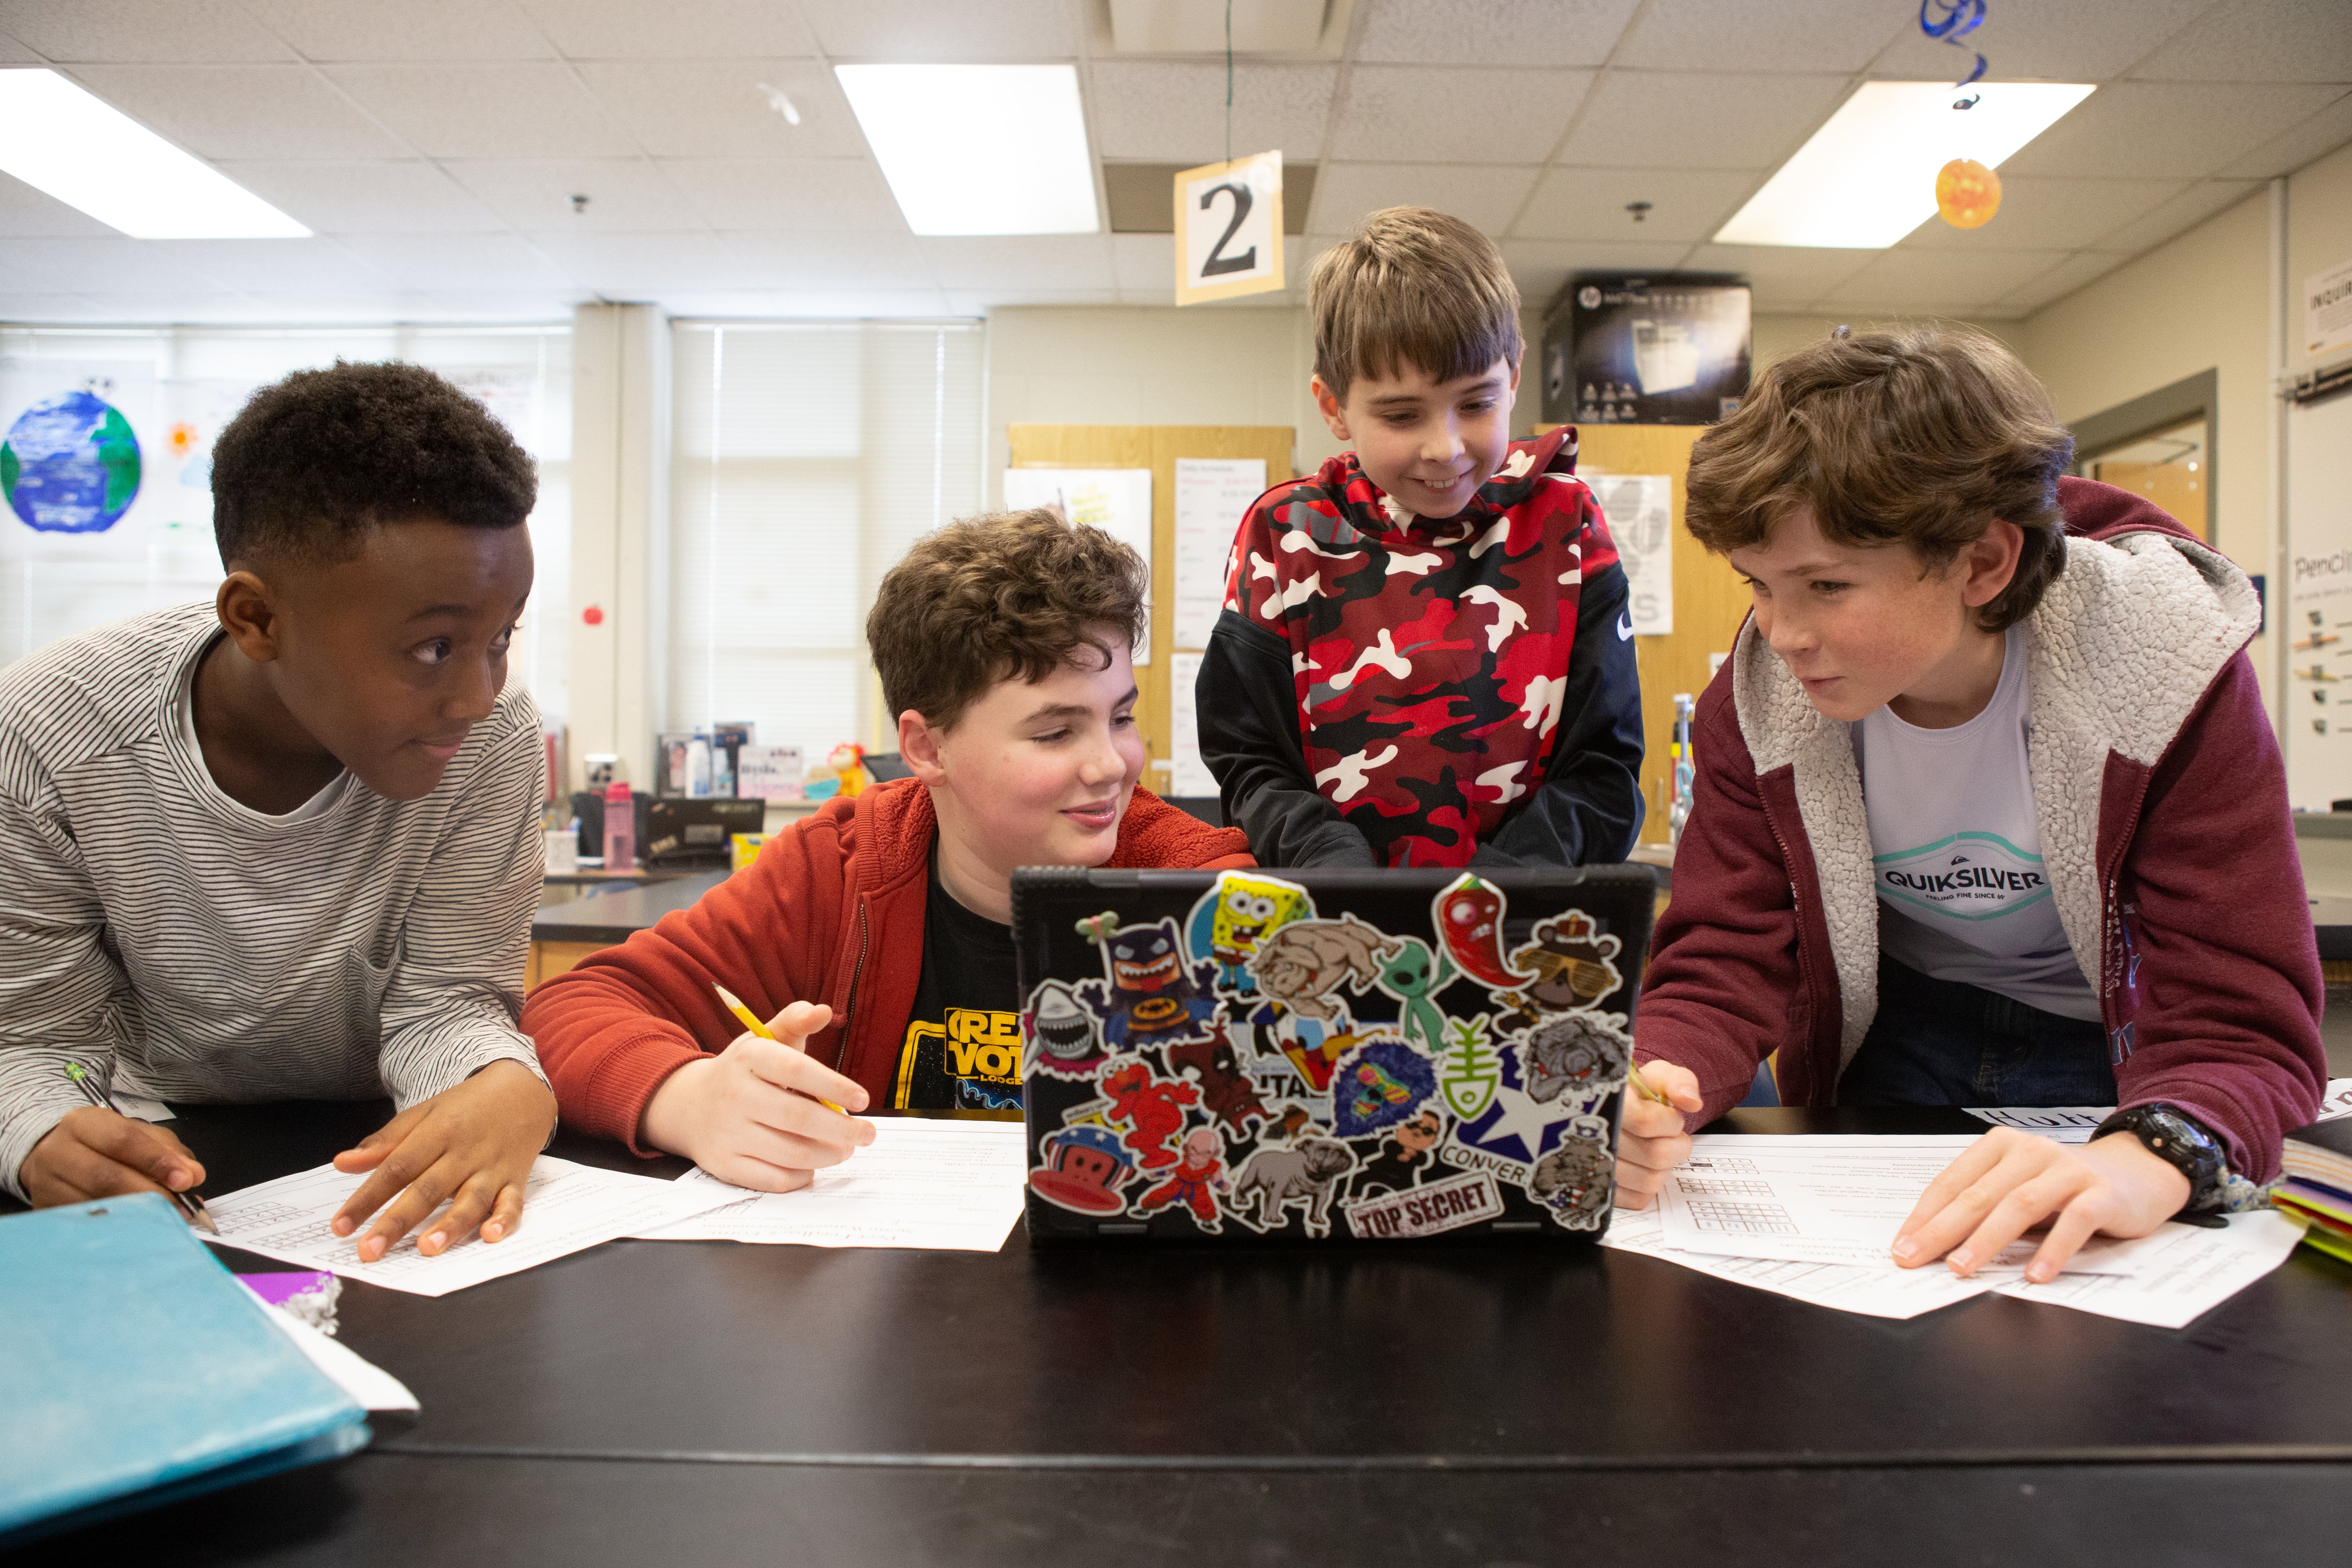 Four middle school students work together on worksheets and a laptop on a desk.